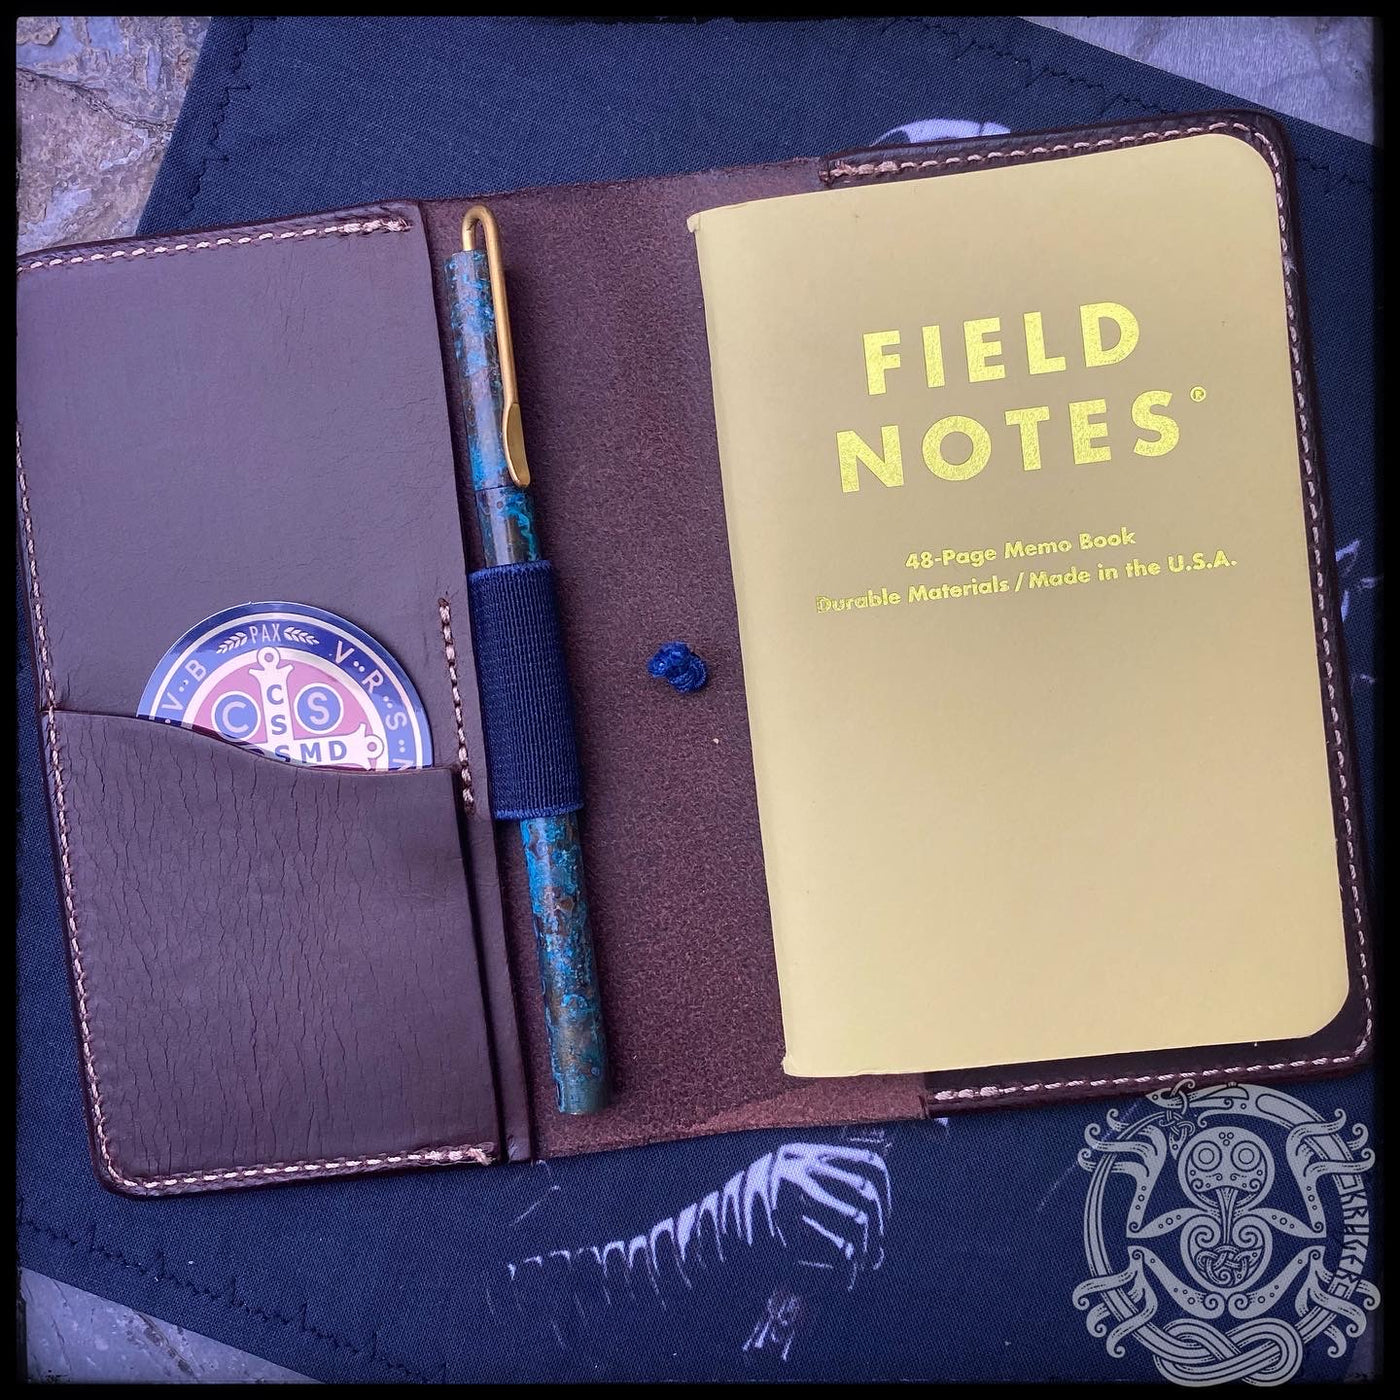 Handmade leather Field Notes cover